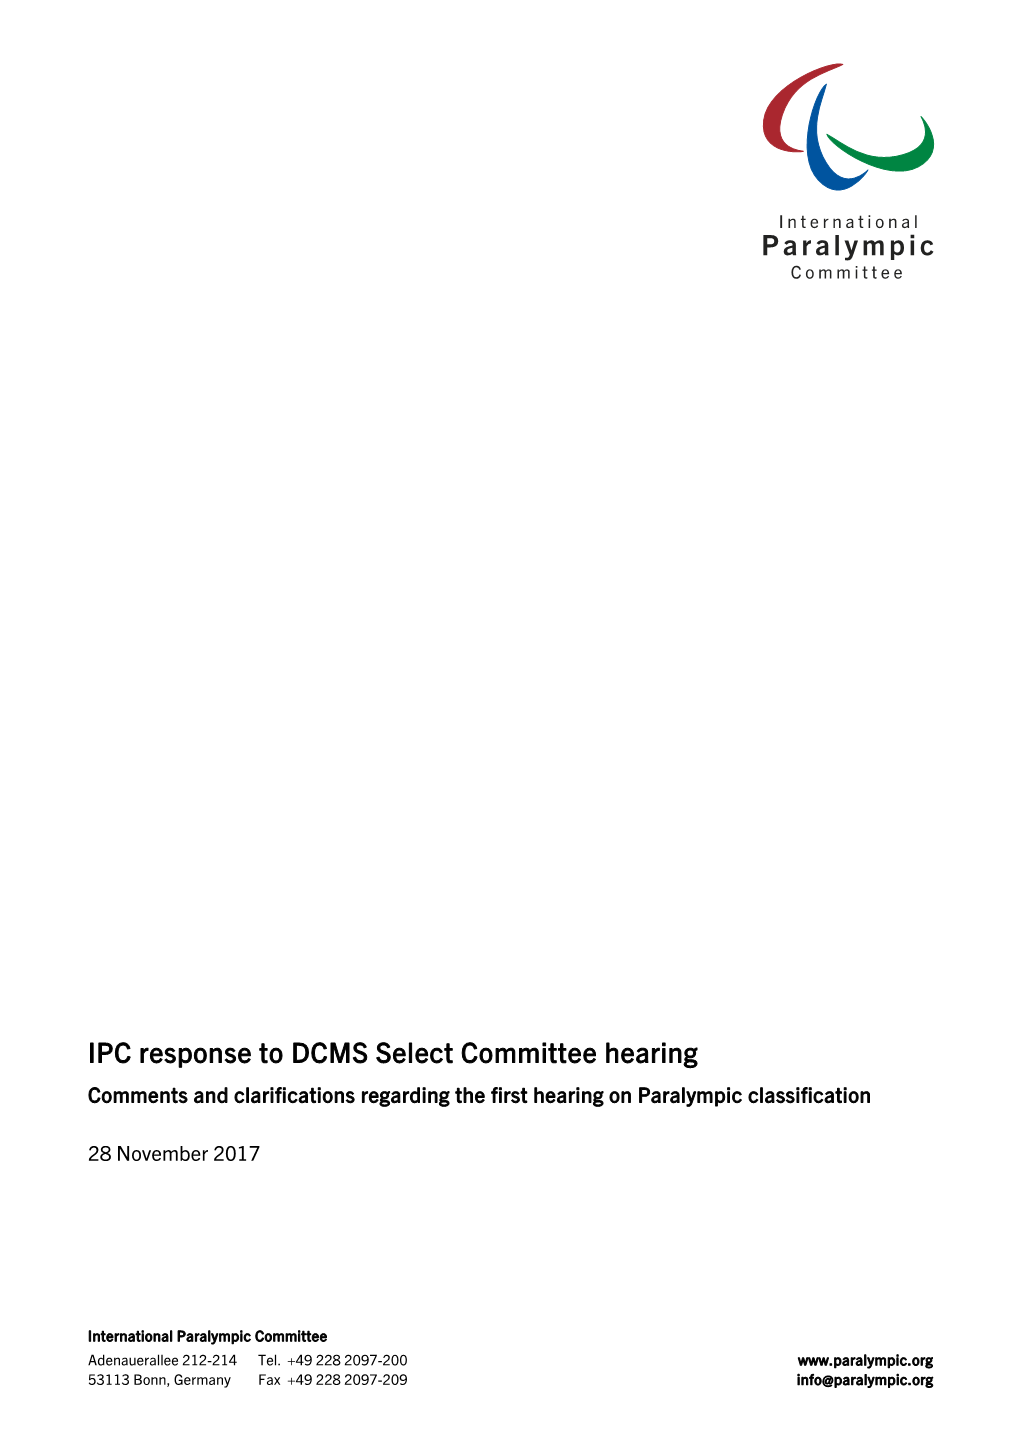 IPC Response to DCMS Select Committee Hearing Comments and Clarifications Regarding the First Hearing on Paralympic Classification